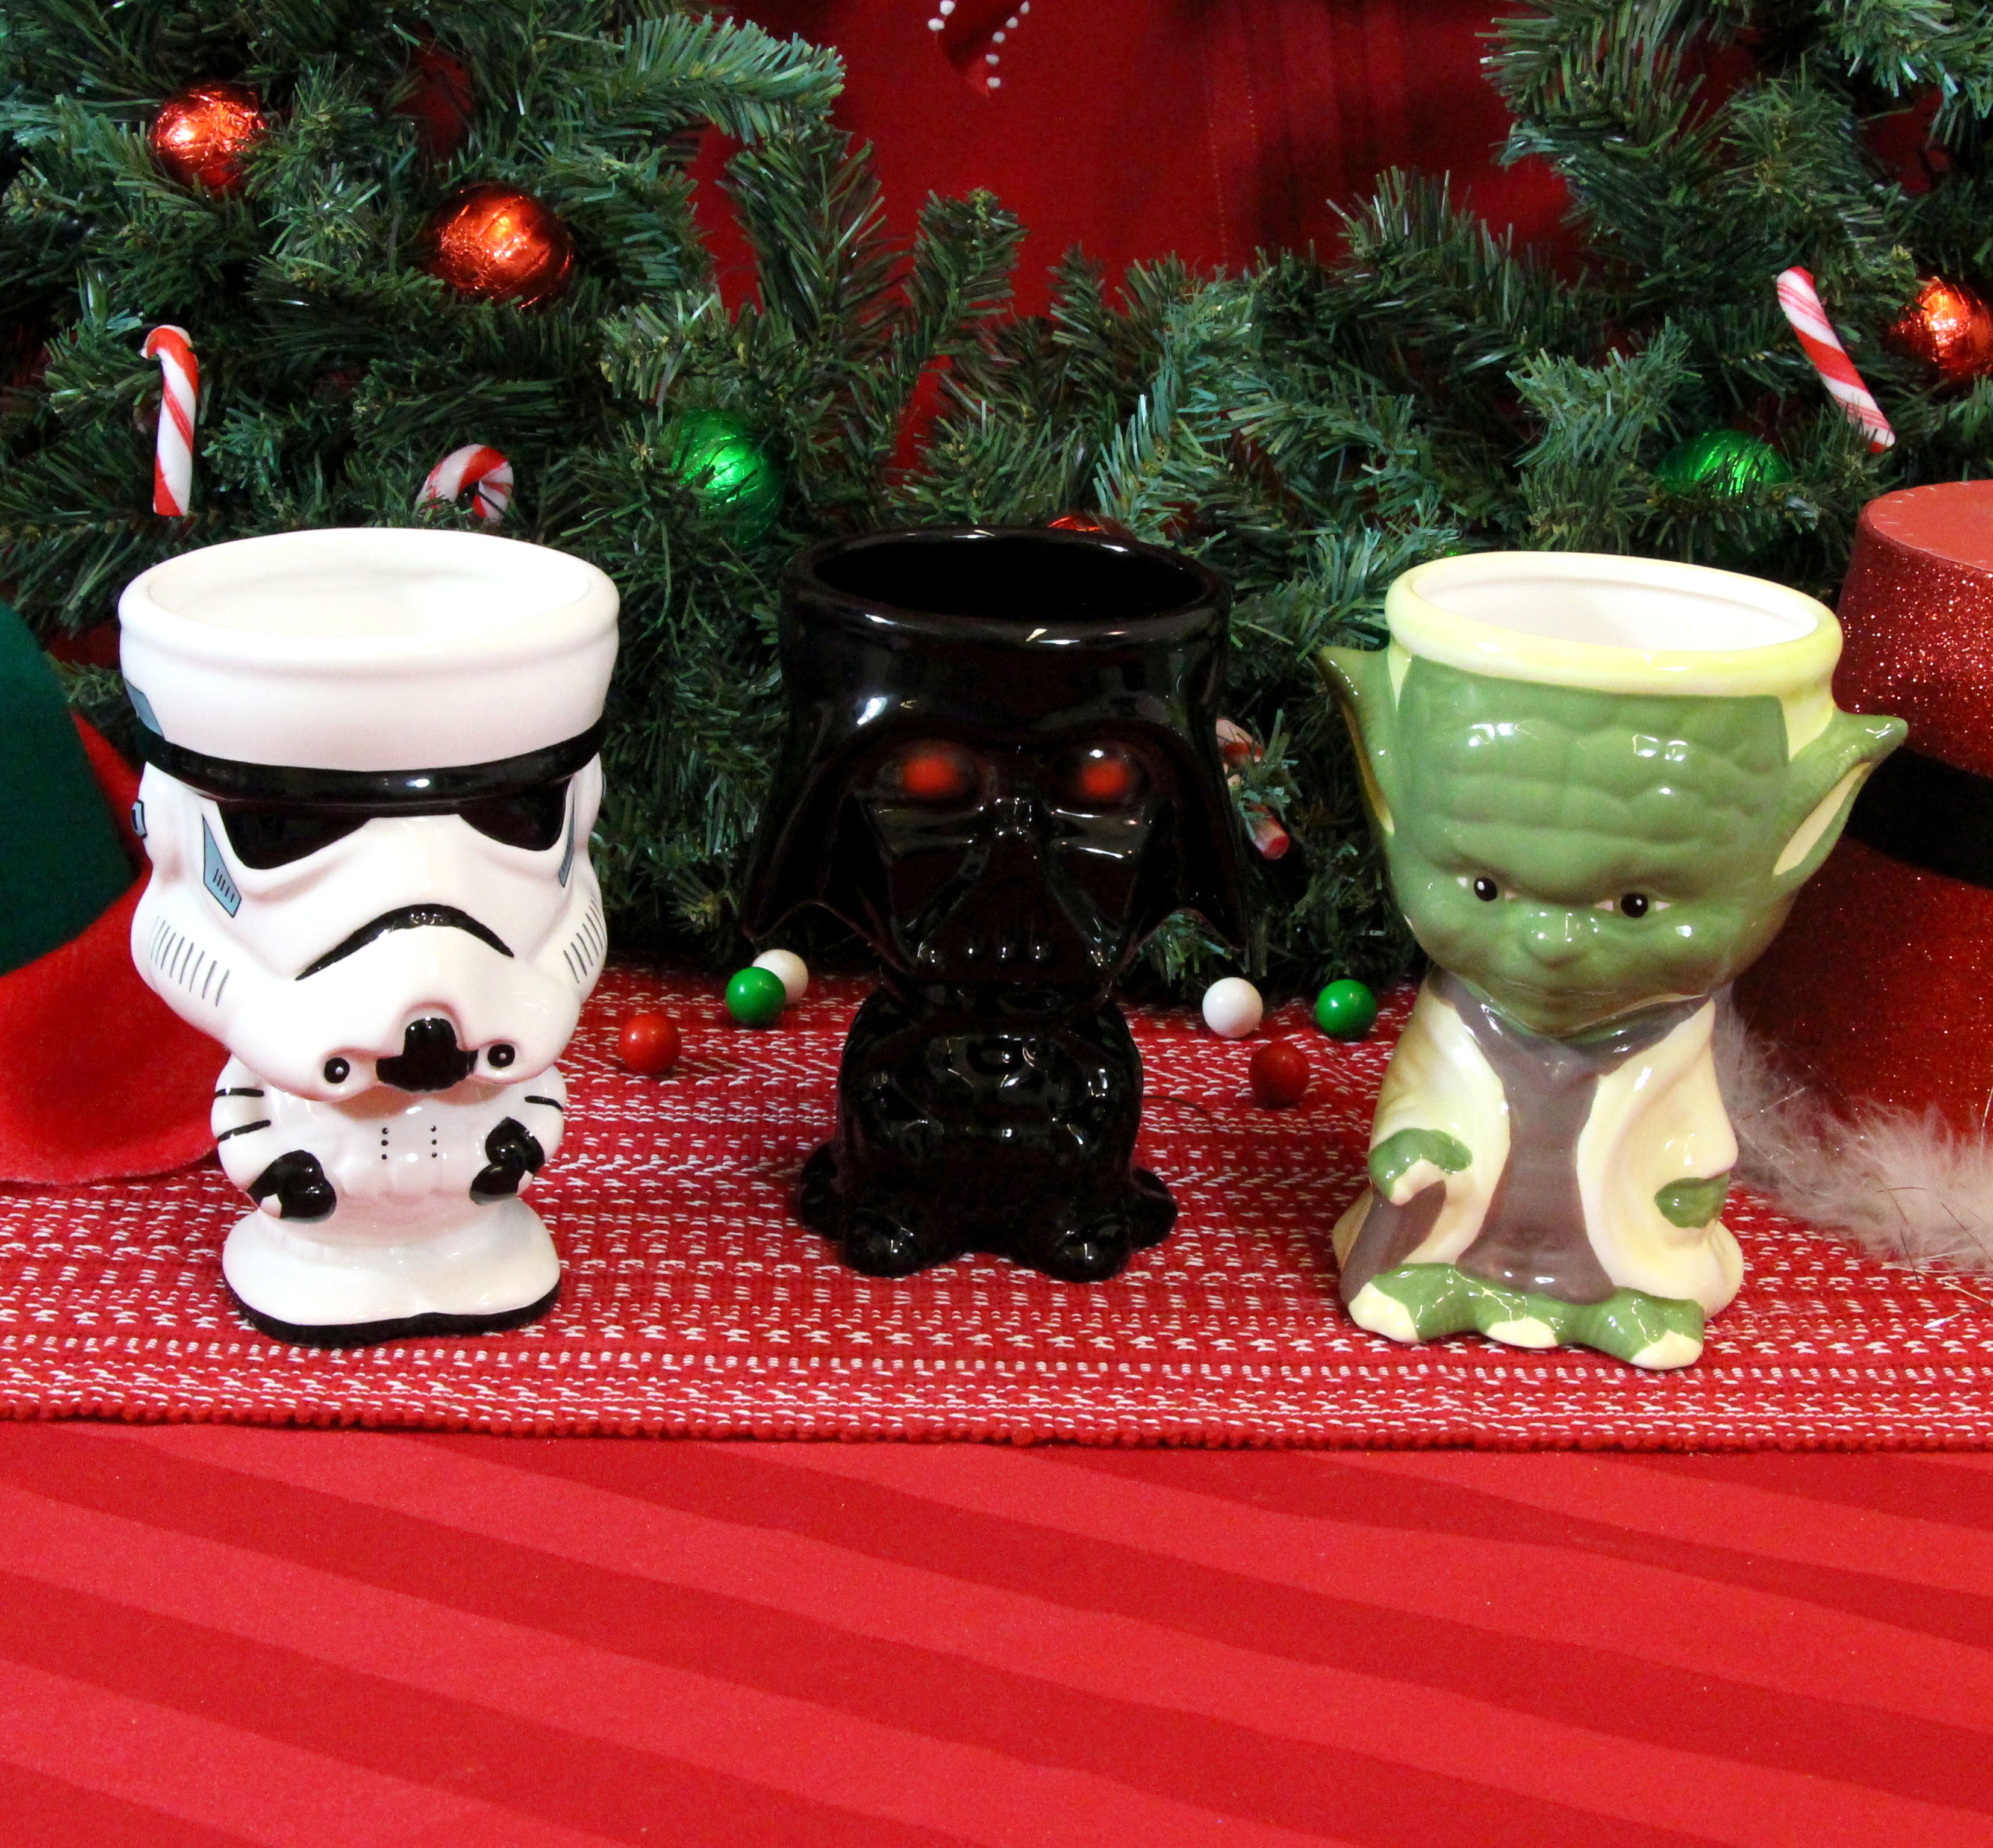 Darth Vader Goblet with Hot Chocolate Mix, Star Wars Mug and Cocoa Set,  Birthday Gifts, 1 Ounce Packet